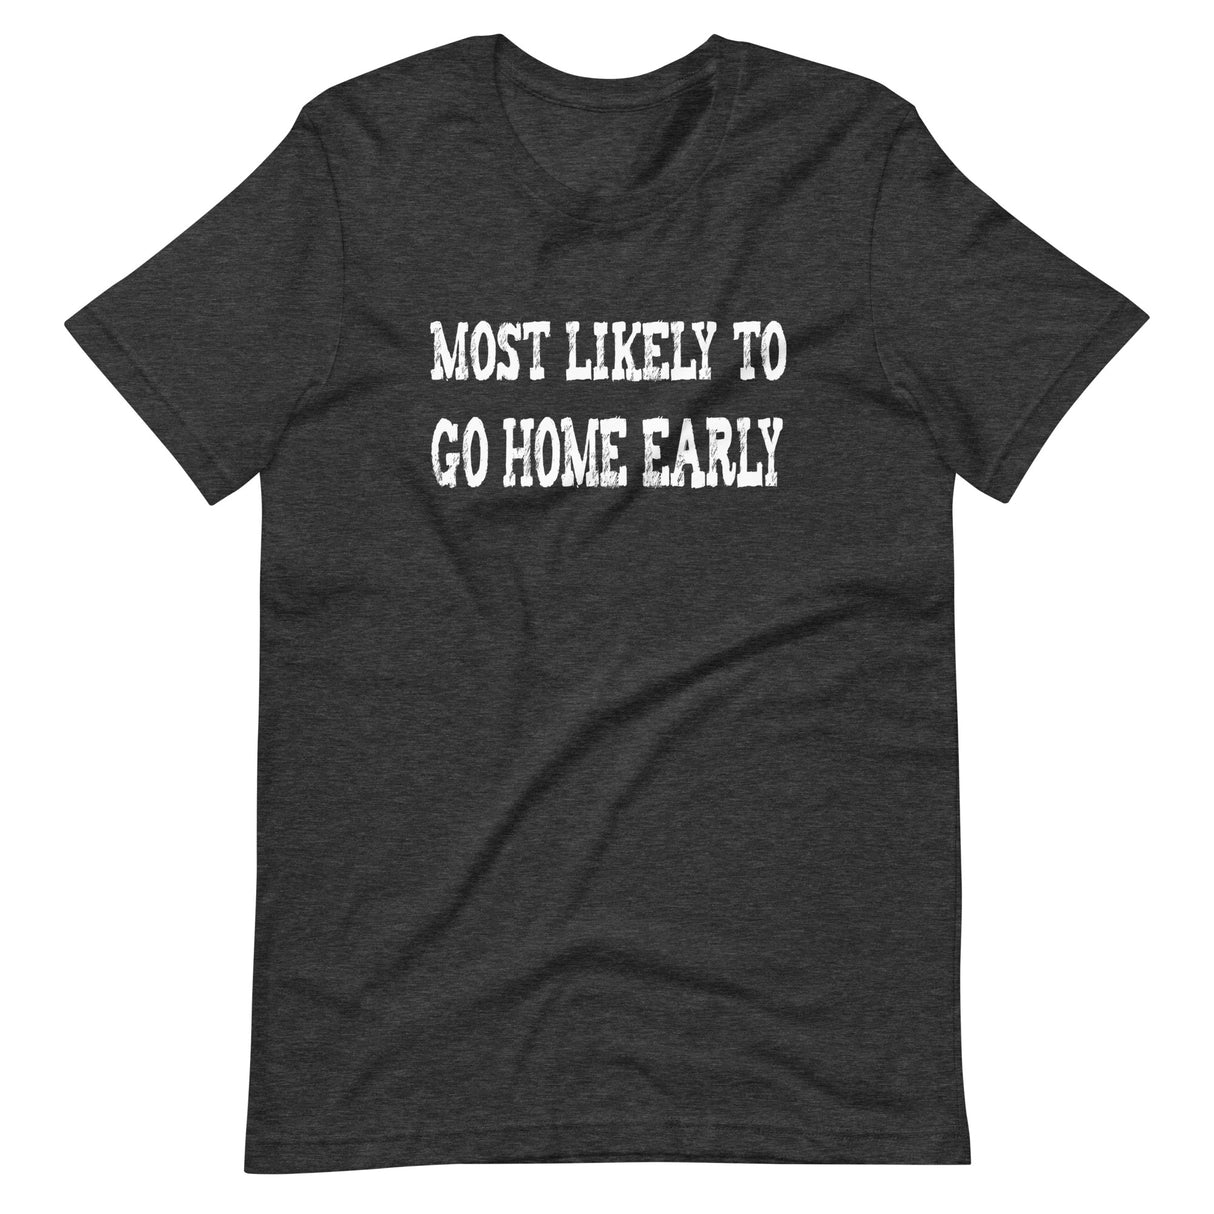 Most Likely To Go Home Early Shirt